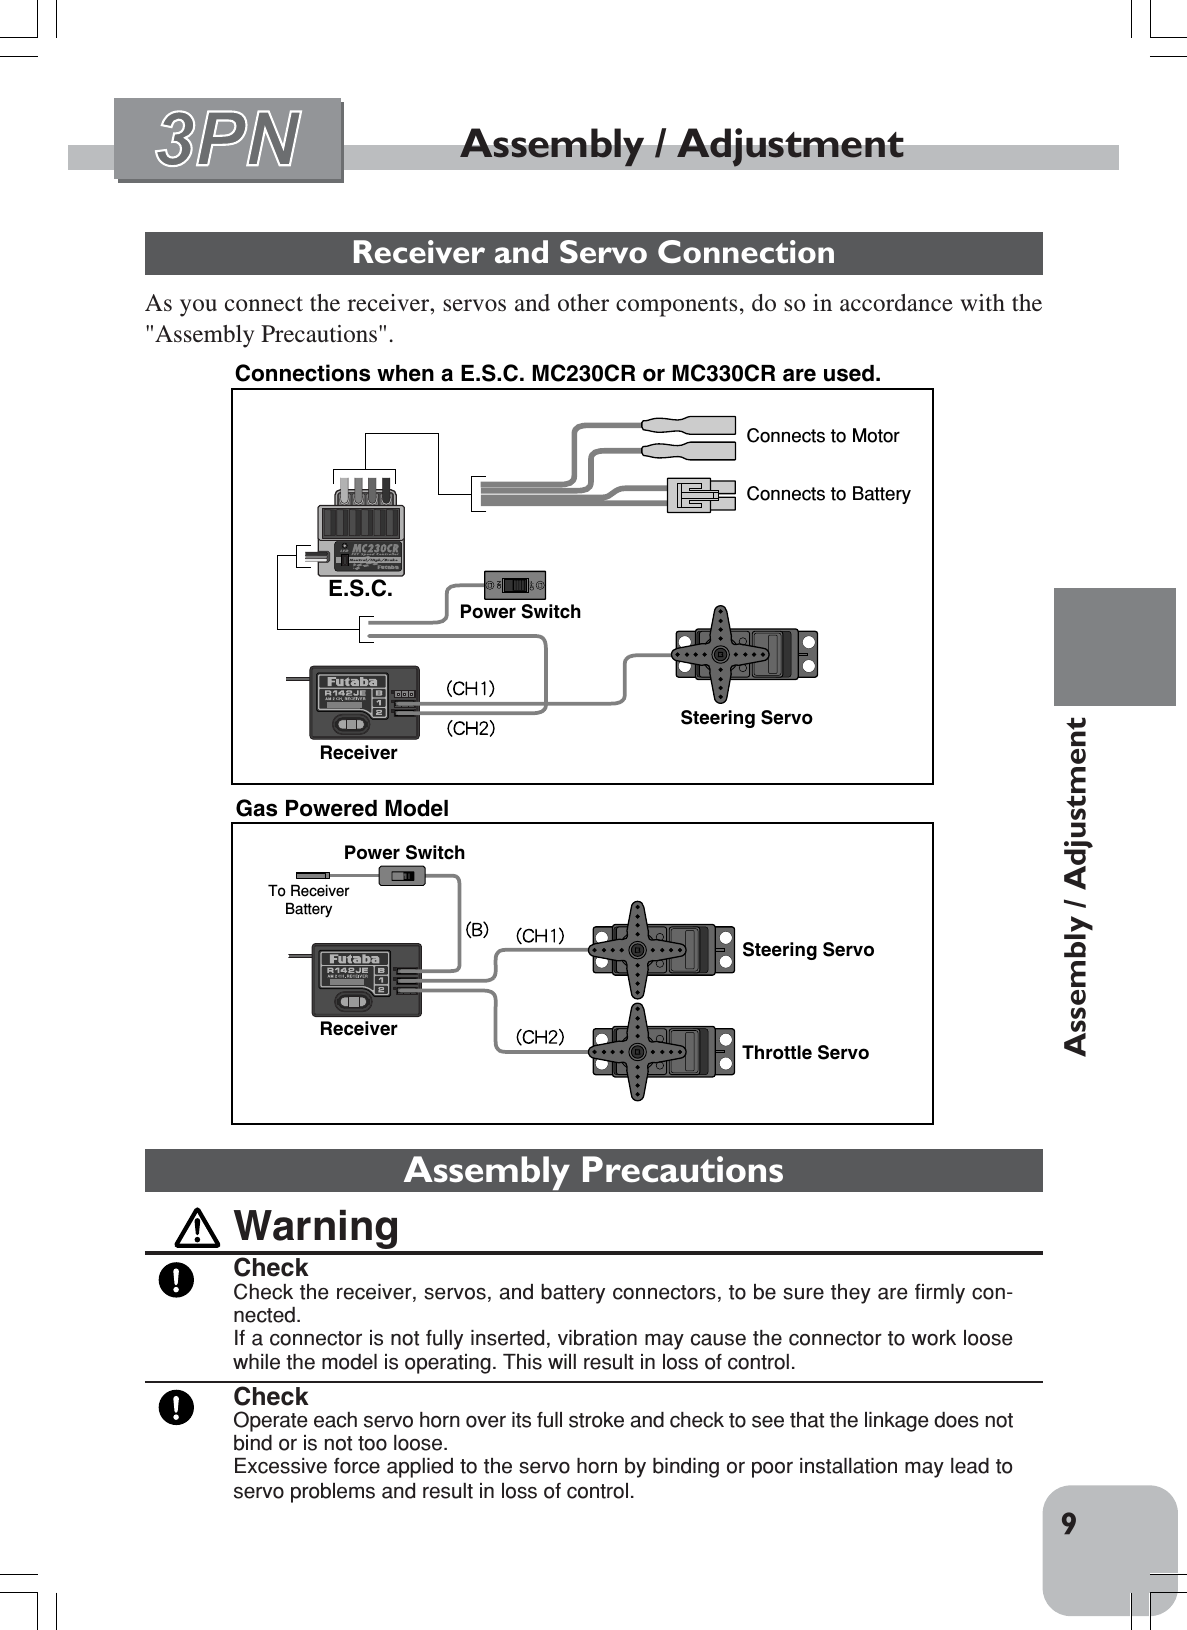 9Assembly / AdjustmentAssembly / AdjustmentReceiver and Servo ConnectionAs you connect the receiver, servos and other components, do so in accordance with the&quot;Assembly Precautions&quot;.Connections when a E.S.C. MC230CR or MC330CR are used.Steering ServoThrottle ServoReceiverReceiverPower SwitchTo Receiver    BatterySteering ServoE.S.C.Power SwitchConnects to MotorConnects to BatteryGas Powered ModelAssembly PrecautionsWarningCheckCheck the receiver, servos, and battery connectors, to be sure they are firmly con-nected.If a connector is not fully inserted, vibration may cause the connector to work loosewhile the model is operating. This will result in loss of control.CheckOperate each servo horn over its full stroke and check to see that the linkage does notbind or is not too loose.Excessive force applied to the servo horn by binding or poor installation may lead toservo problems and result in loss of control.